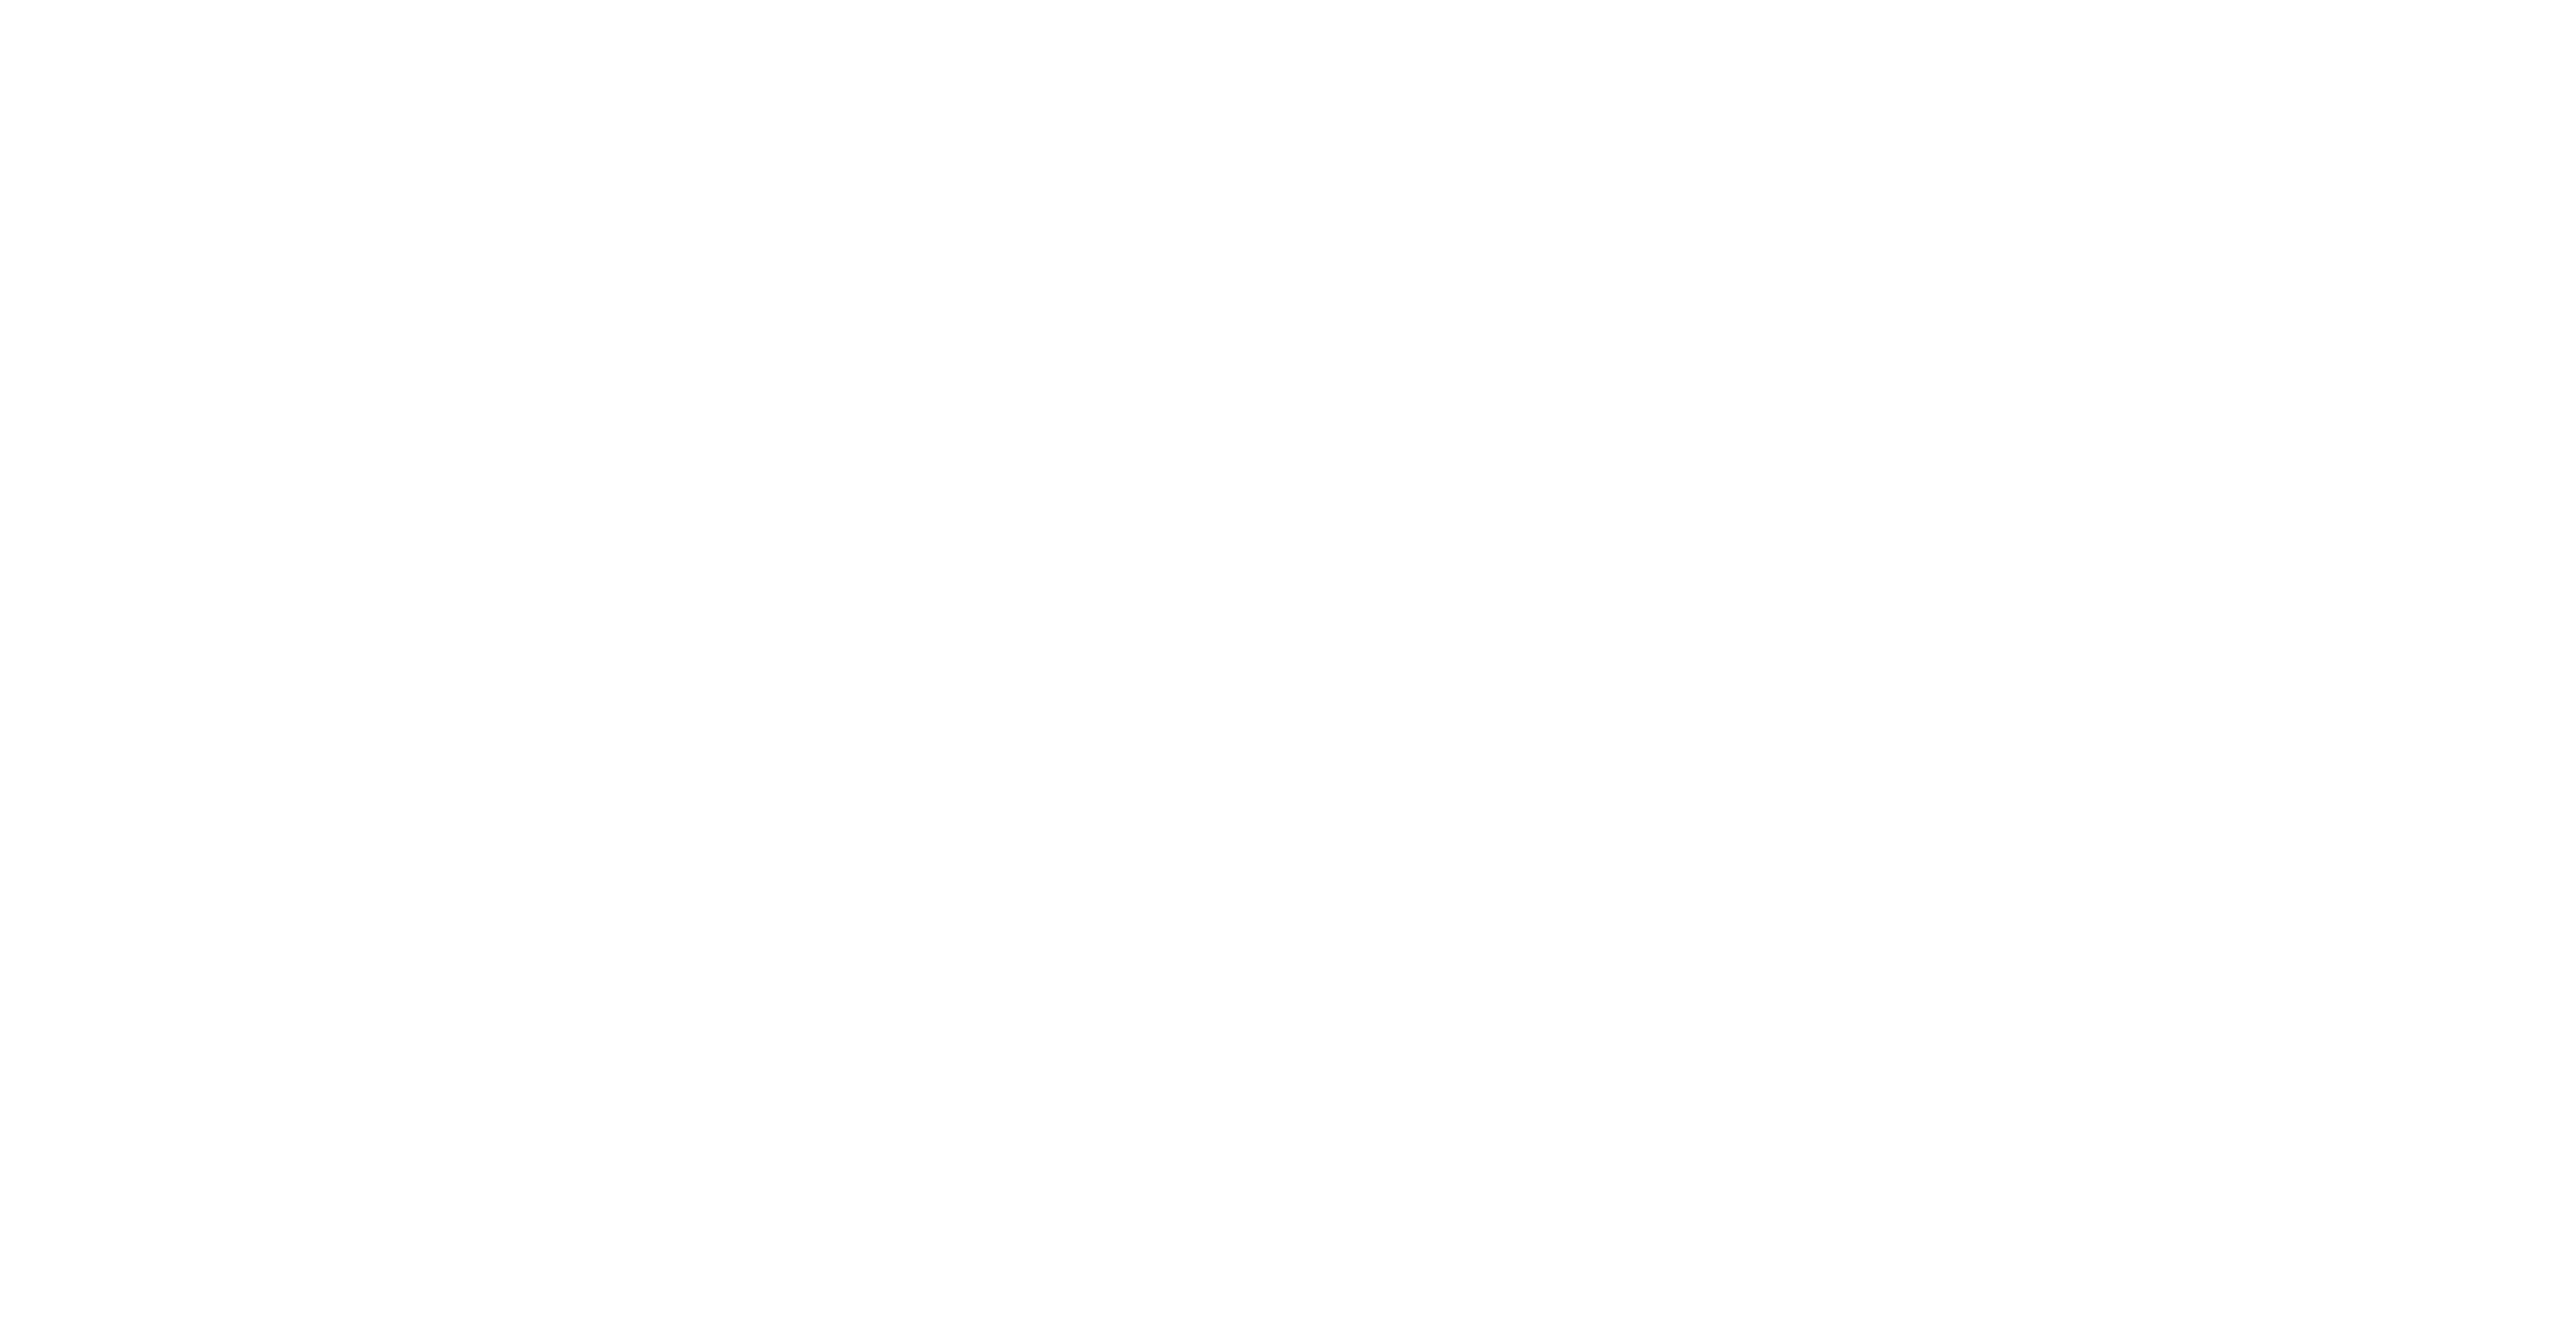 2022 Tennessee Whiskey Distillery of the Year